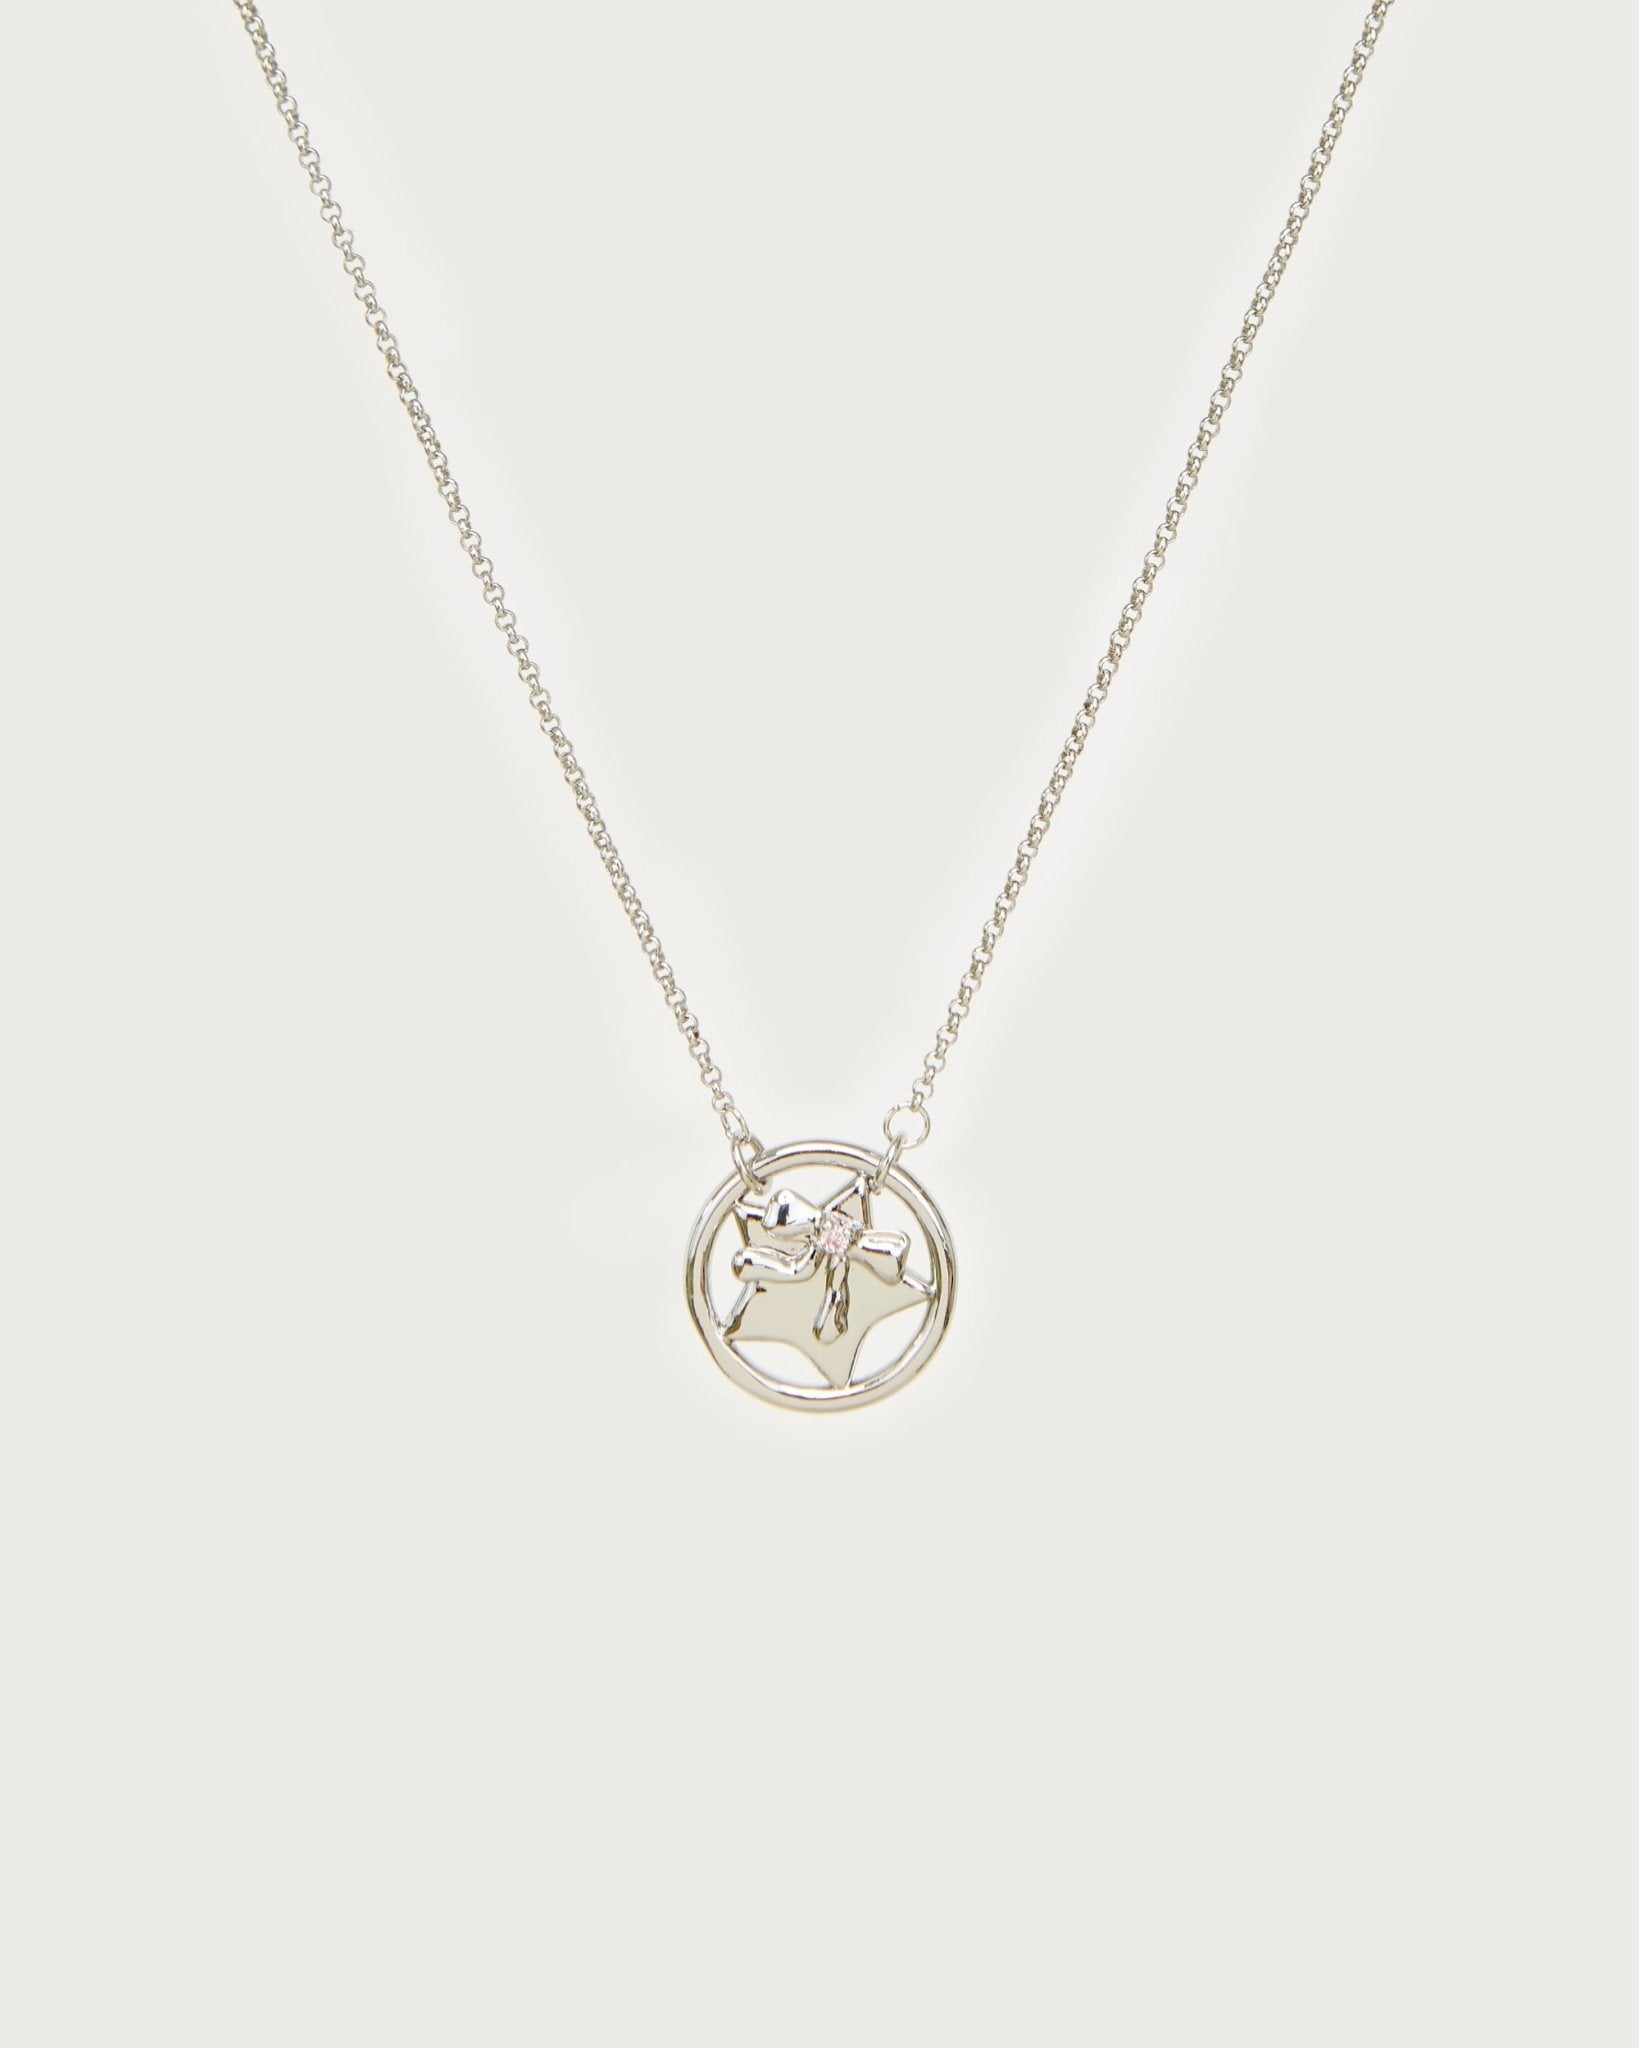 The Pure Star Necklace